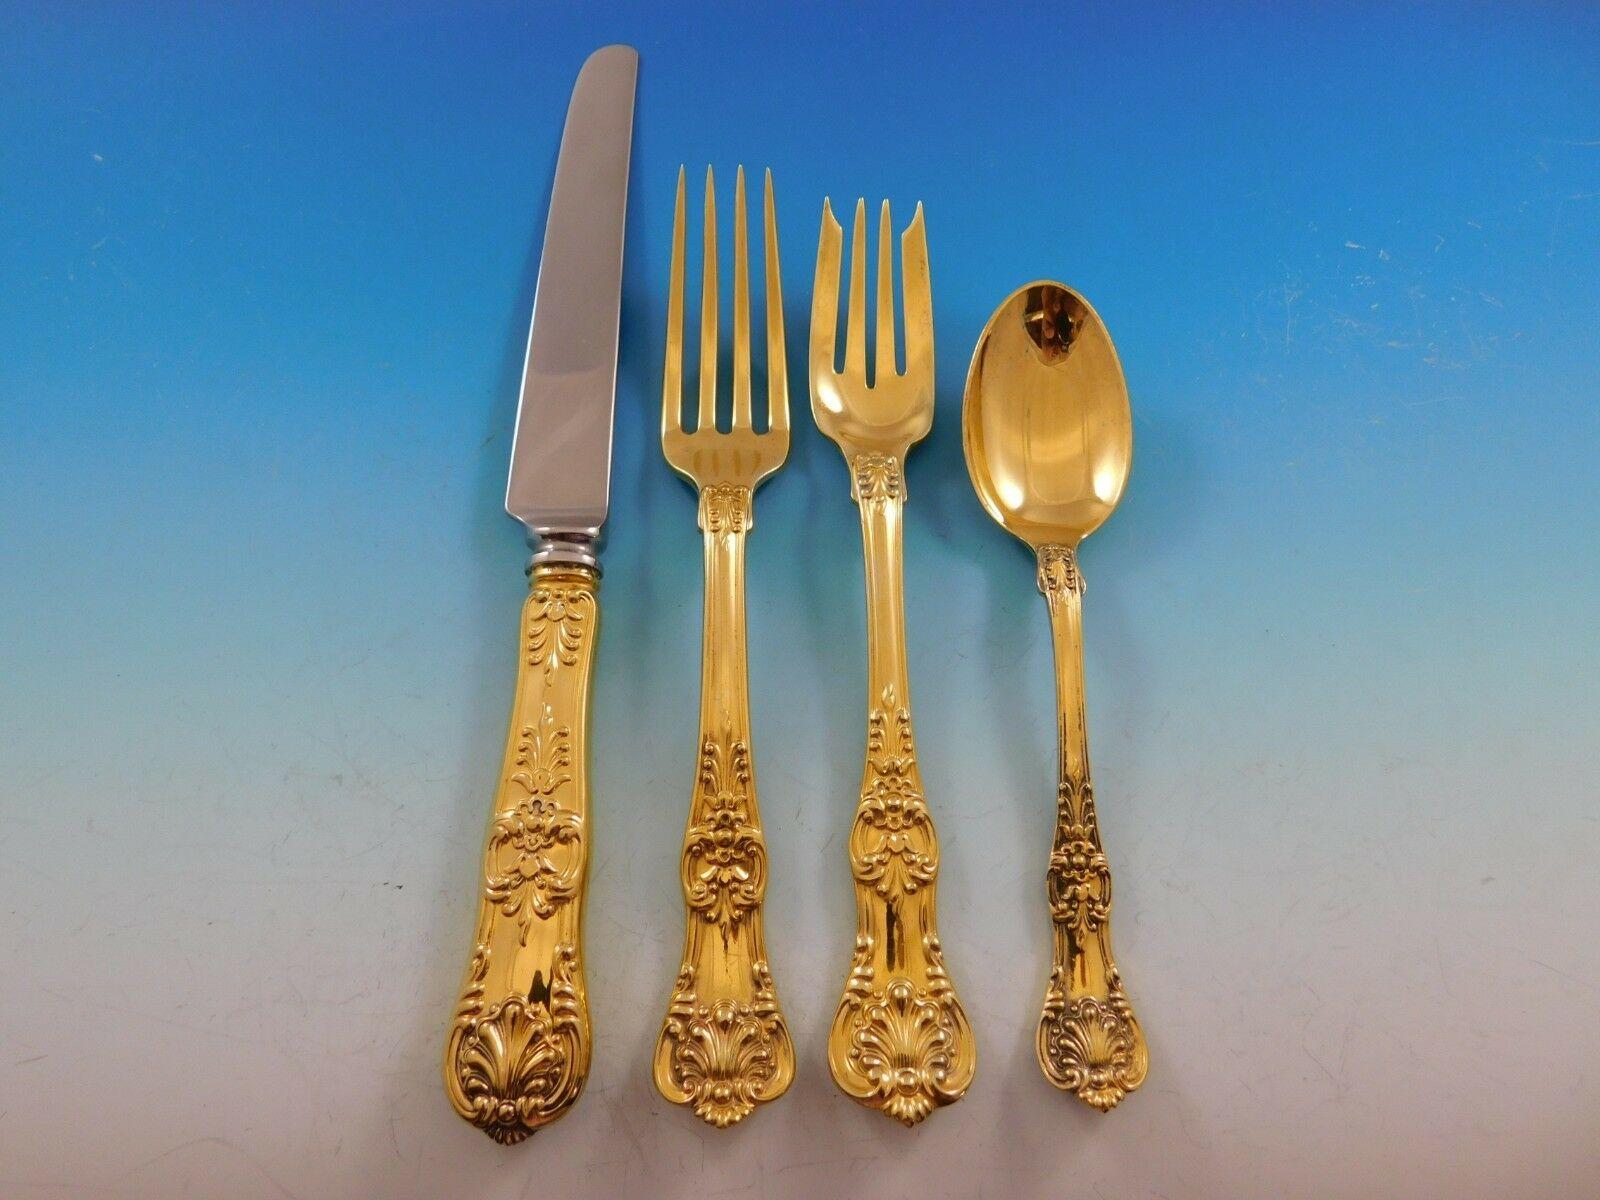 Outstanding English King Vermeil (completely gilded in 24k gold over sterling) by Tiffany sterling silver Flatware set, 48 pieces. This set includes:

8 knives, 9